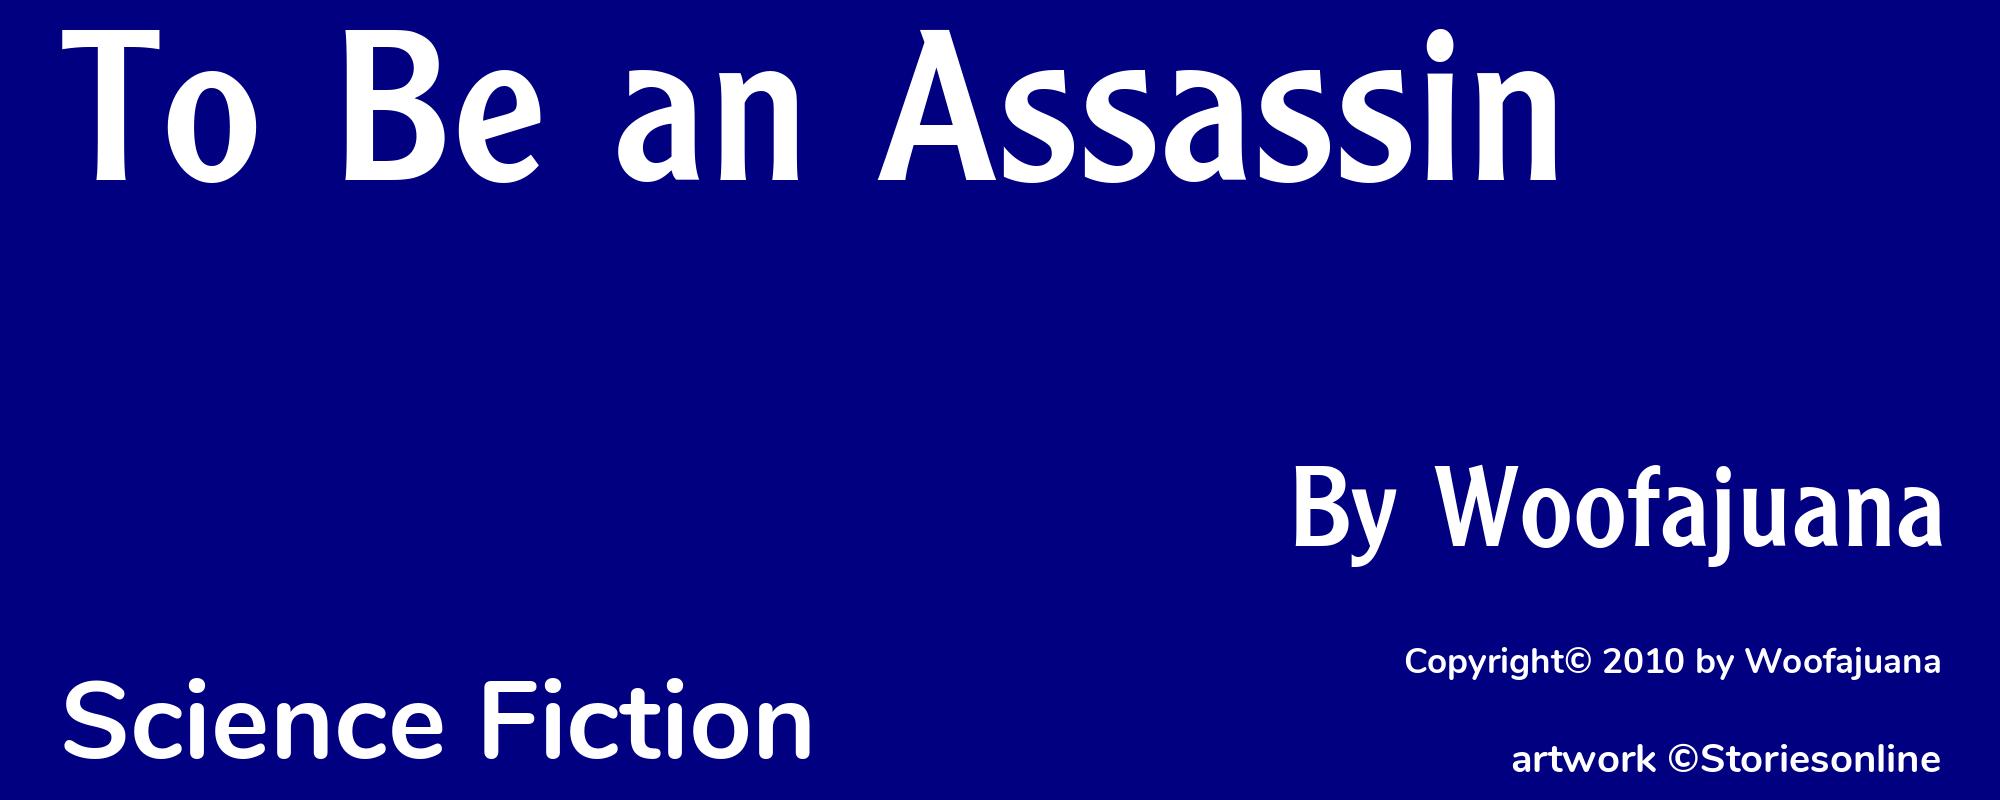 To Be an Assassin - Cover